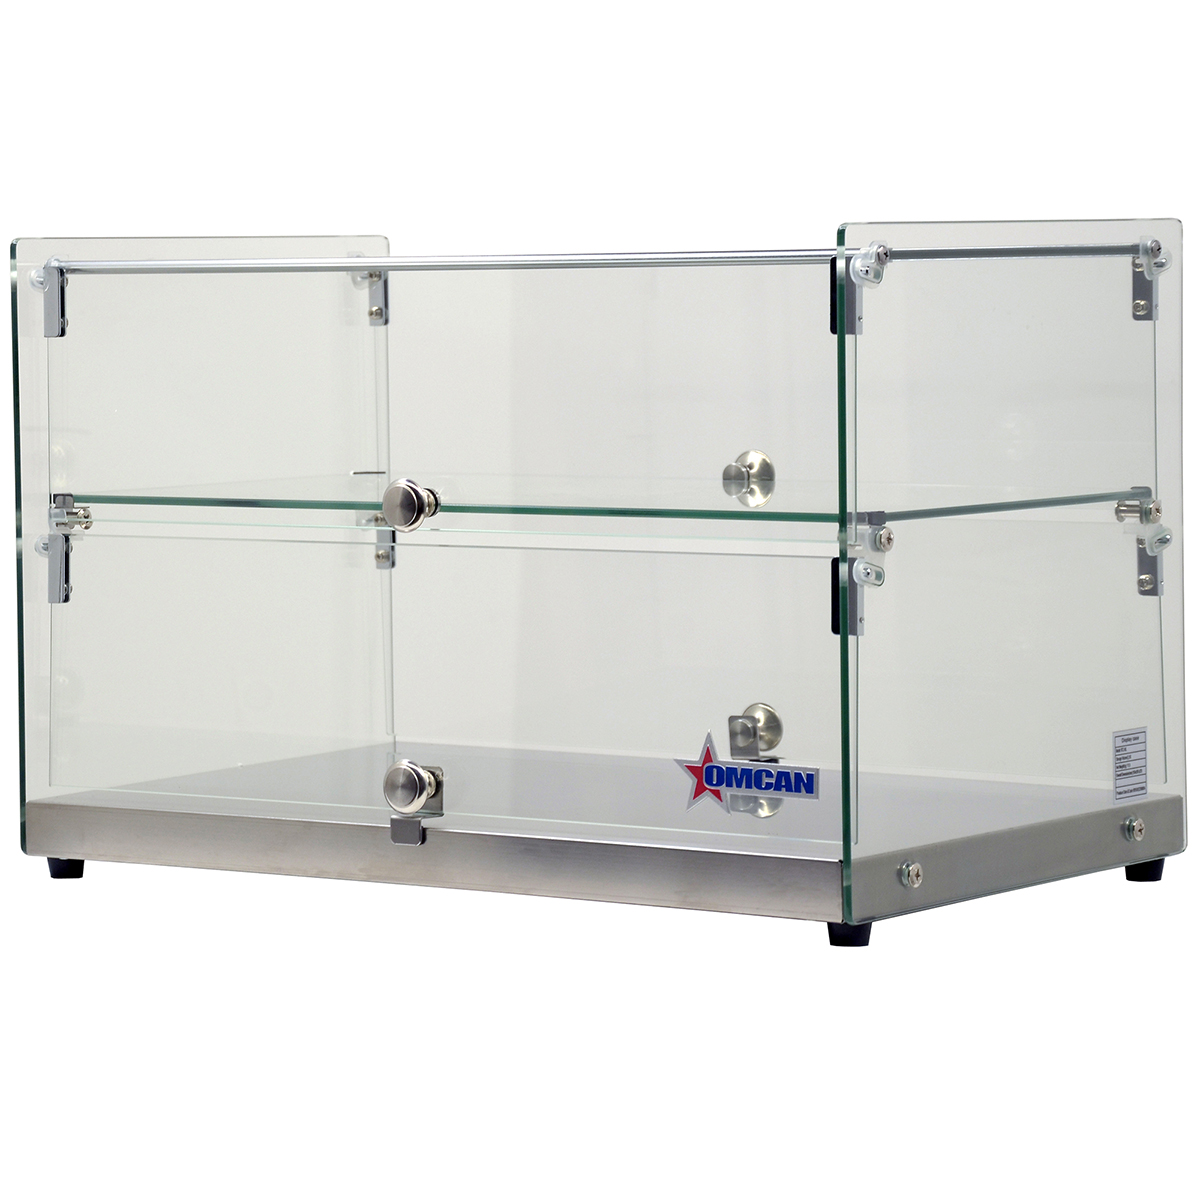 Omcan 44373 Countertop Food Display Case w/Square Front Glass, 22"W, 50 L Capacity image 1